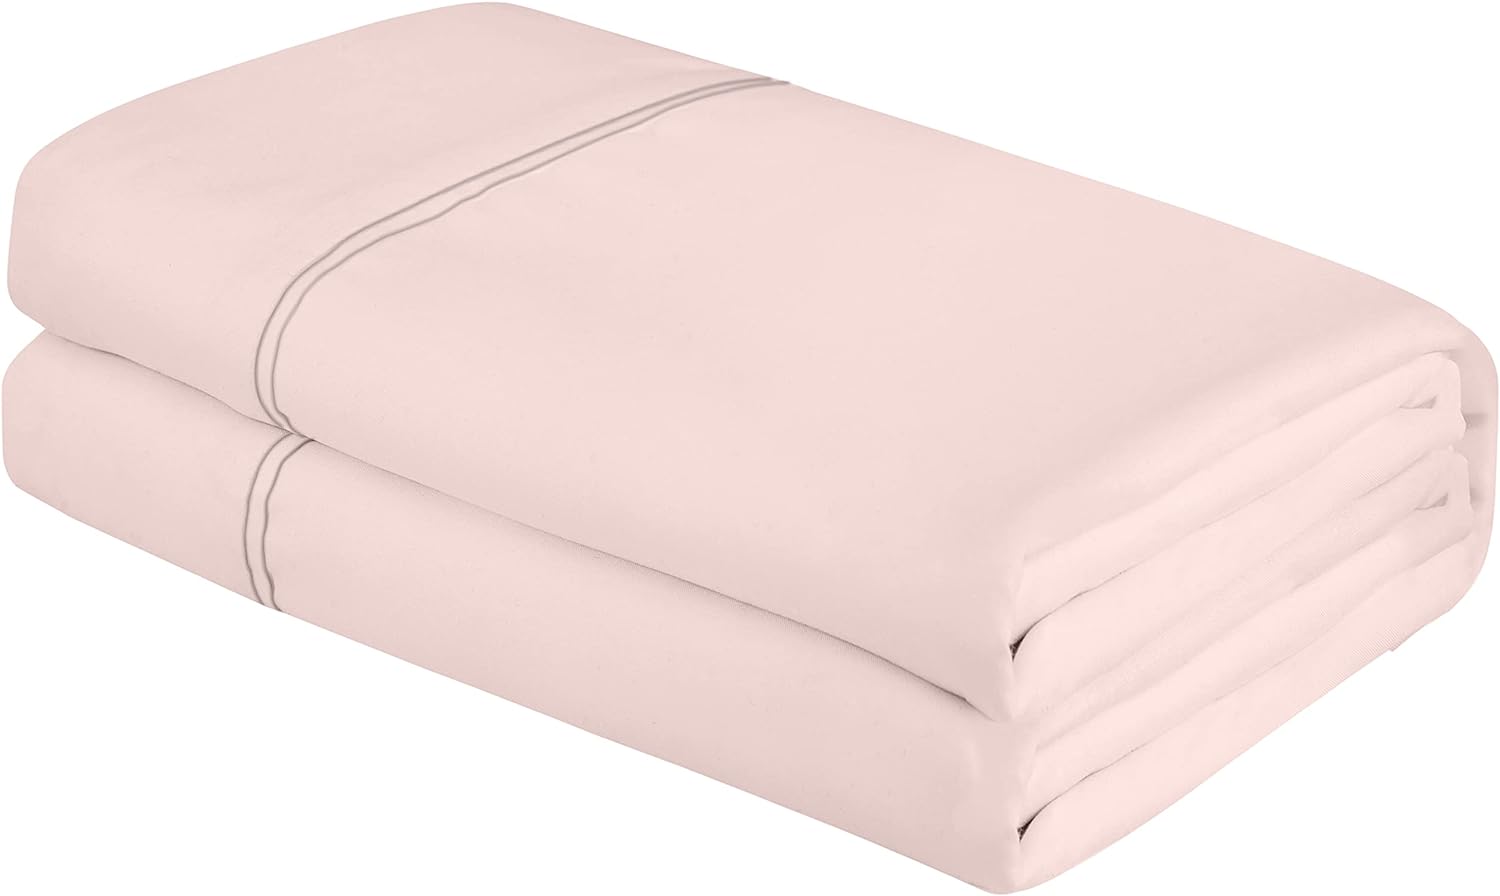 ROYALE LINENS Twin Size Flat Sheet Only - Brushed 1800 Microfiber - Ultra Soft & Breathable - Wrinkle & Stain Resistant - Hotel Quality Flat Sheet Sold Separately - Top Sheet for Bed - (Twin, Pink)